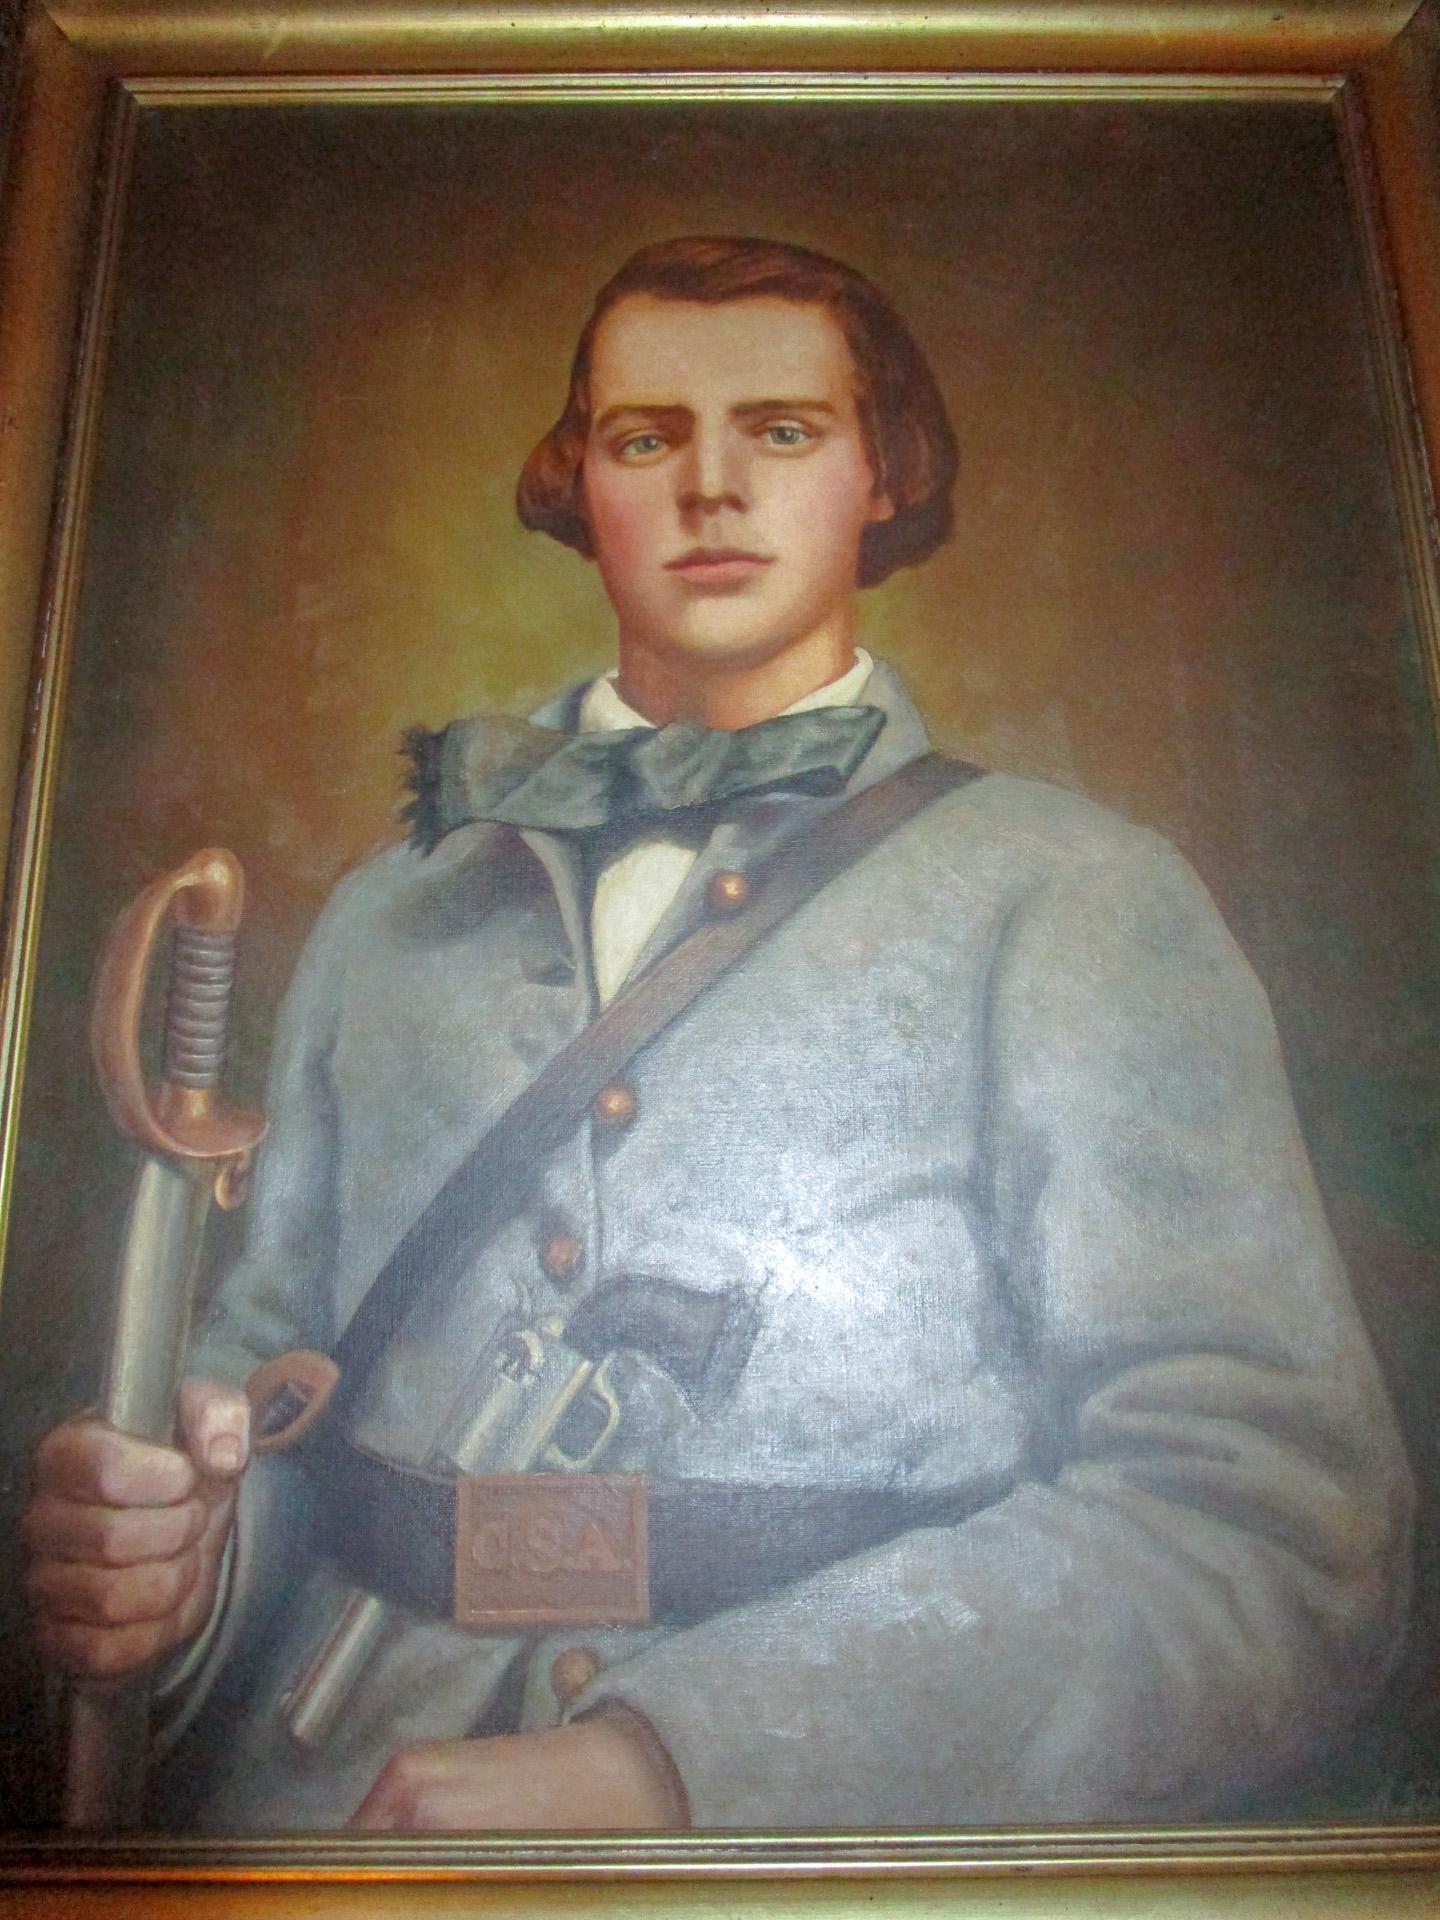 19th Century 19th C American Civil War Confederate Soldier Framed Oil Painting w/ Provenance